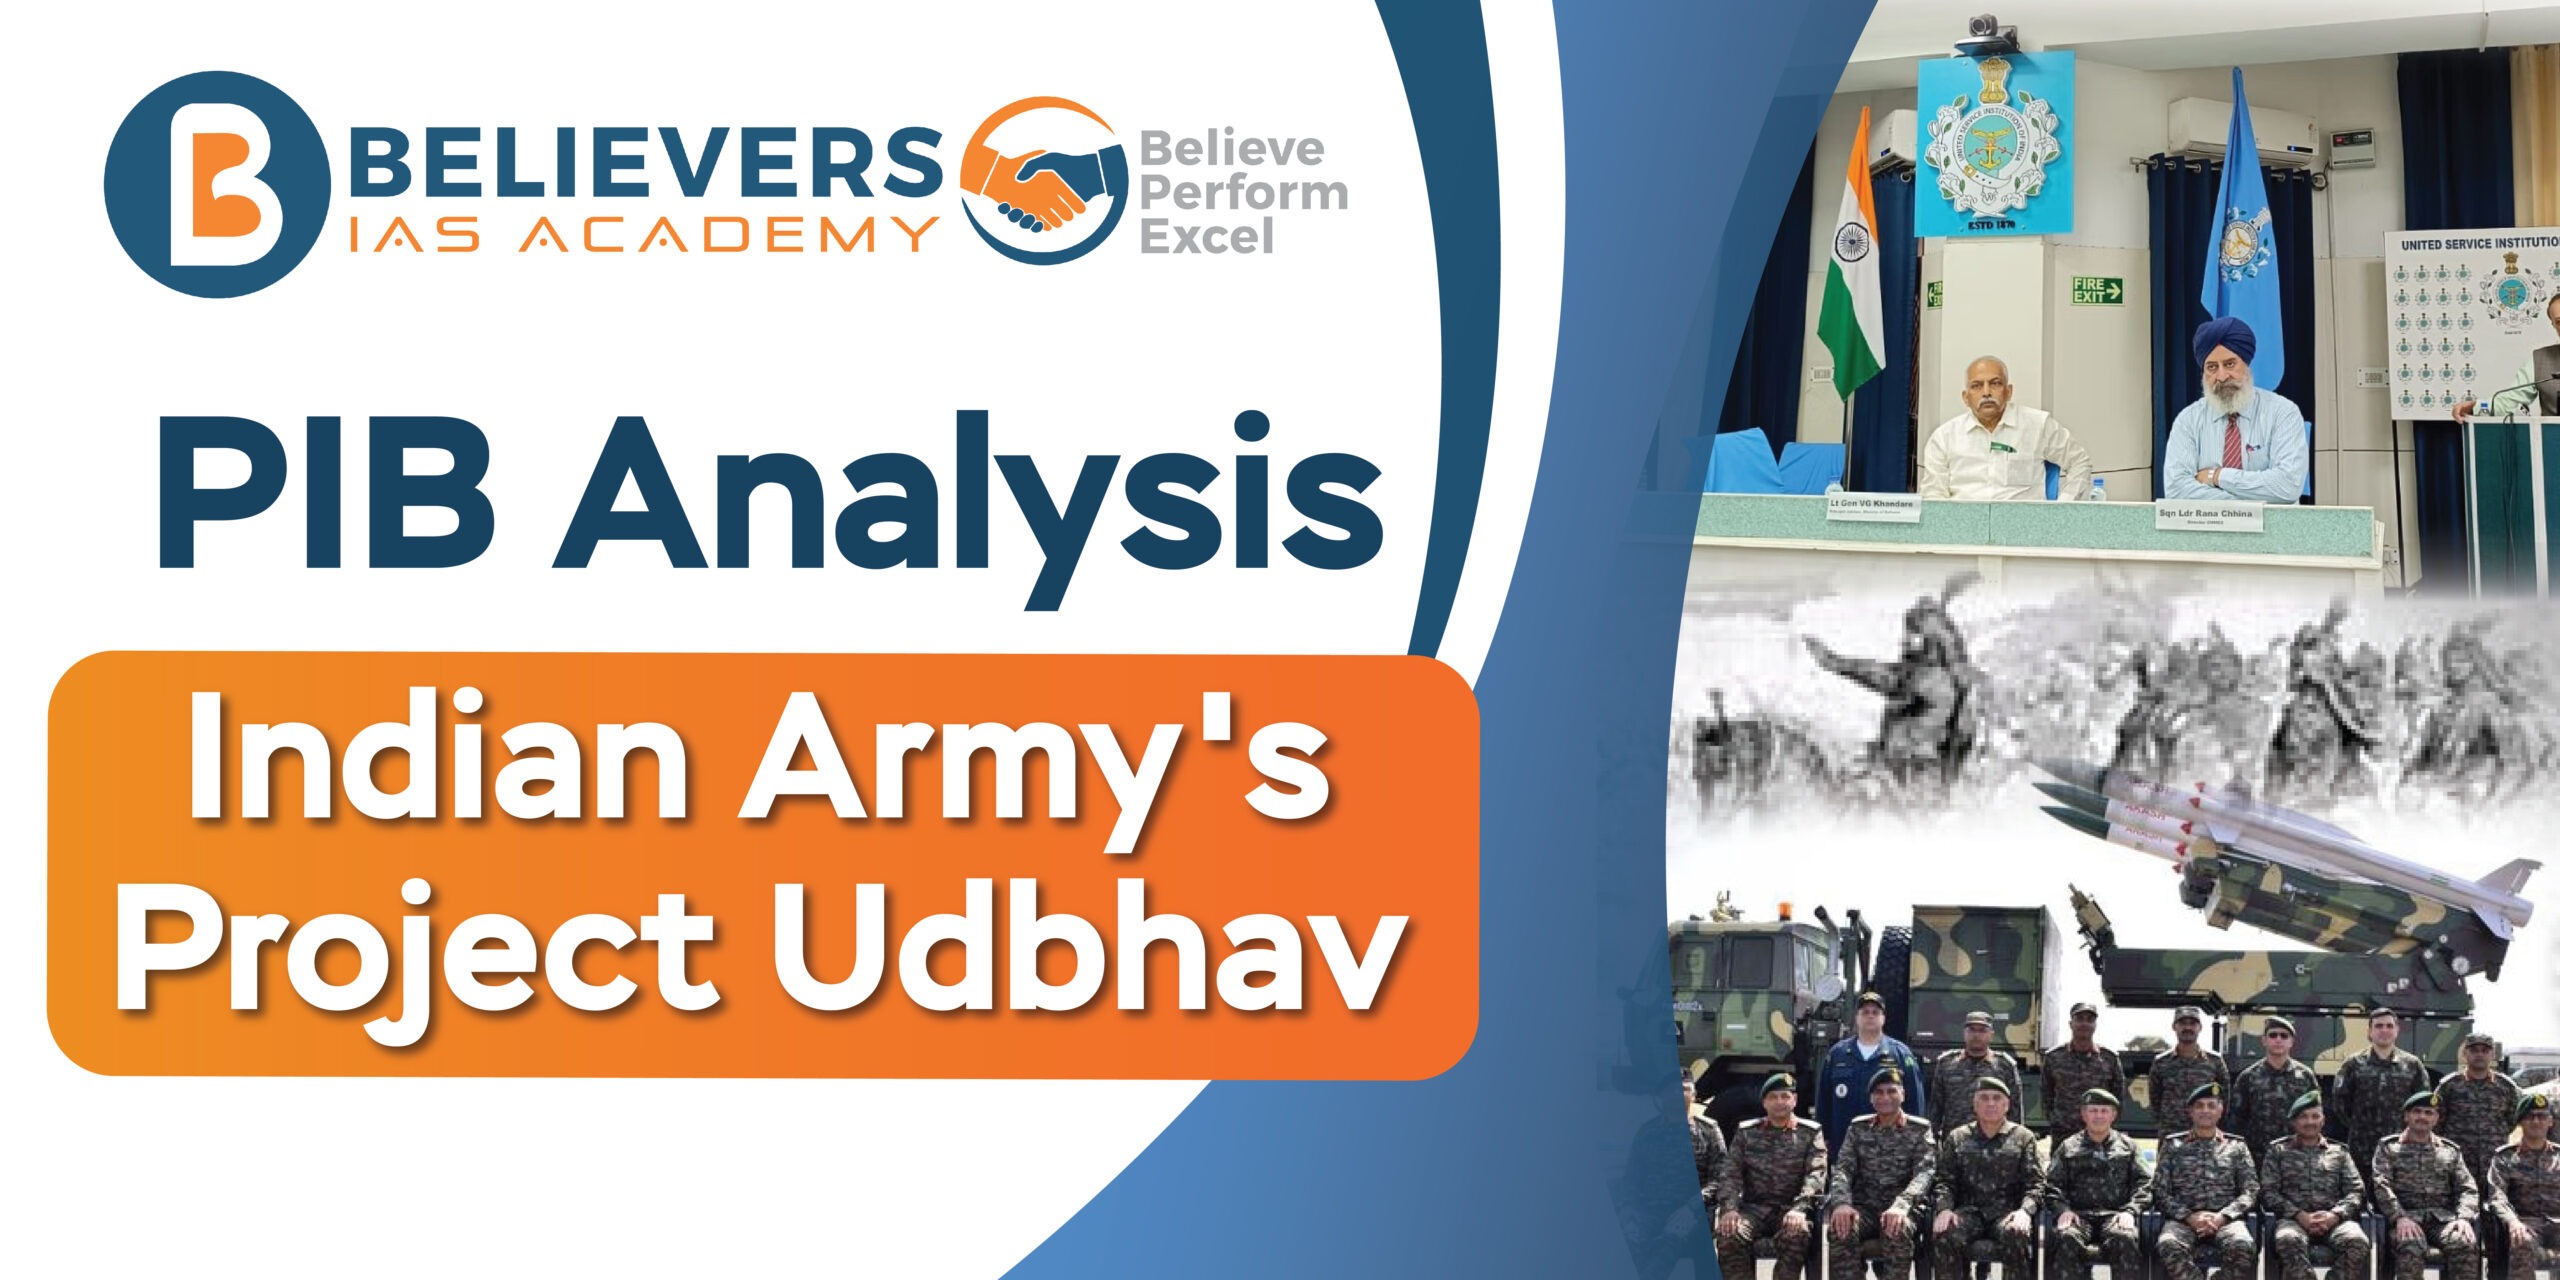 Indian Army's Project Udbhav